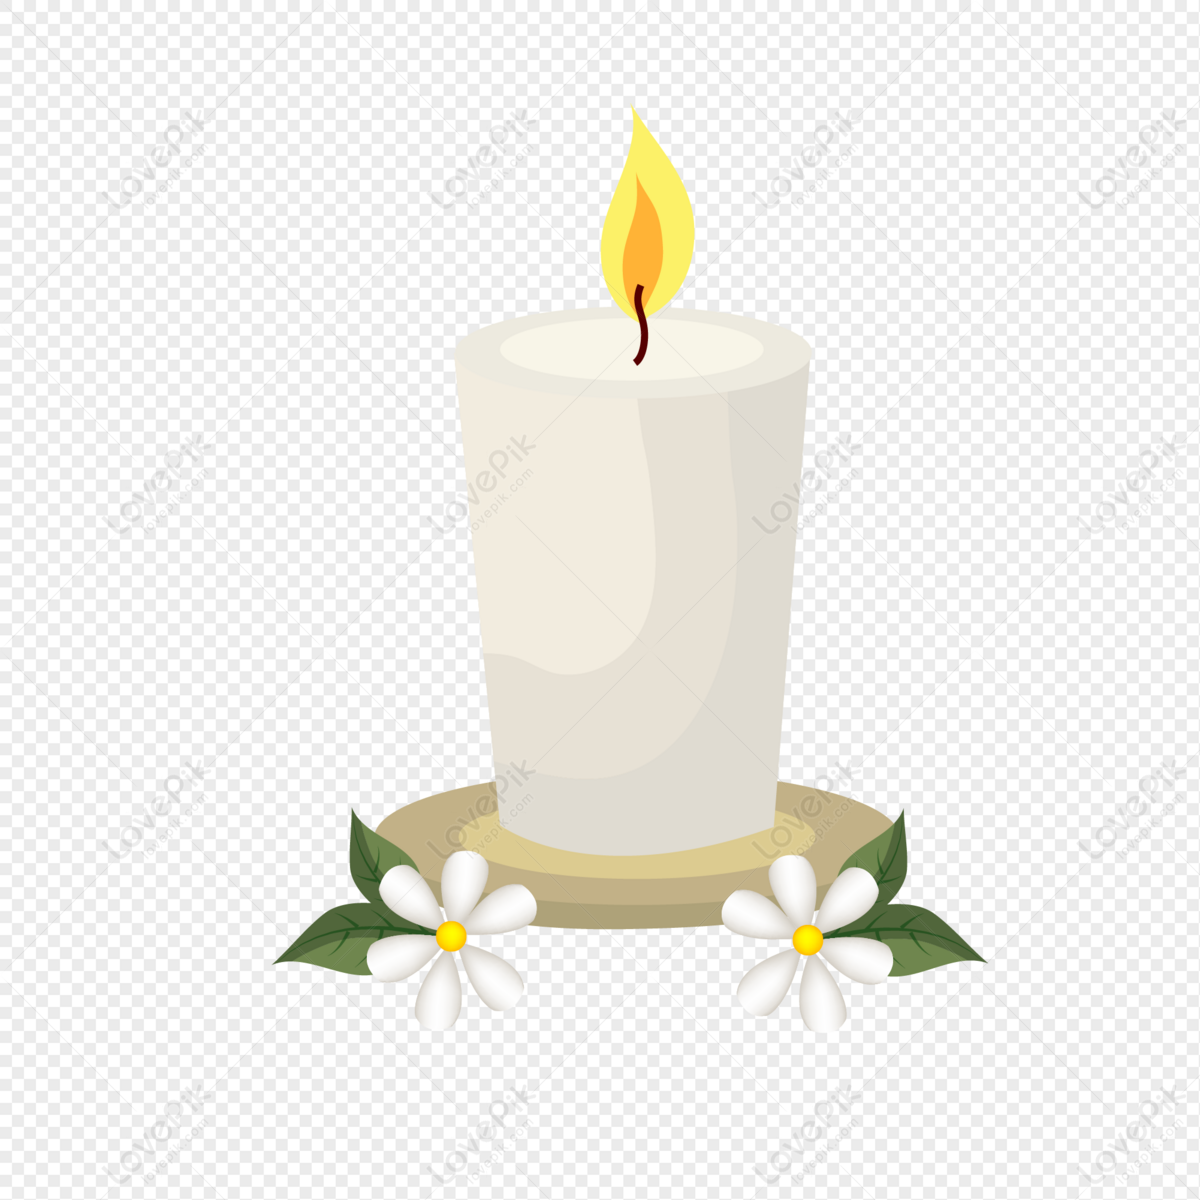 White Candle PNG White Transparent And Clipart Image For Free Download -  Lovepik | 401487362